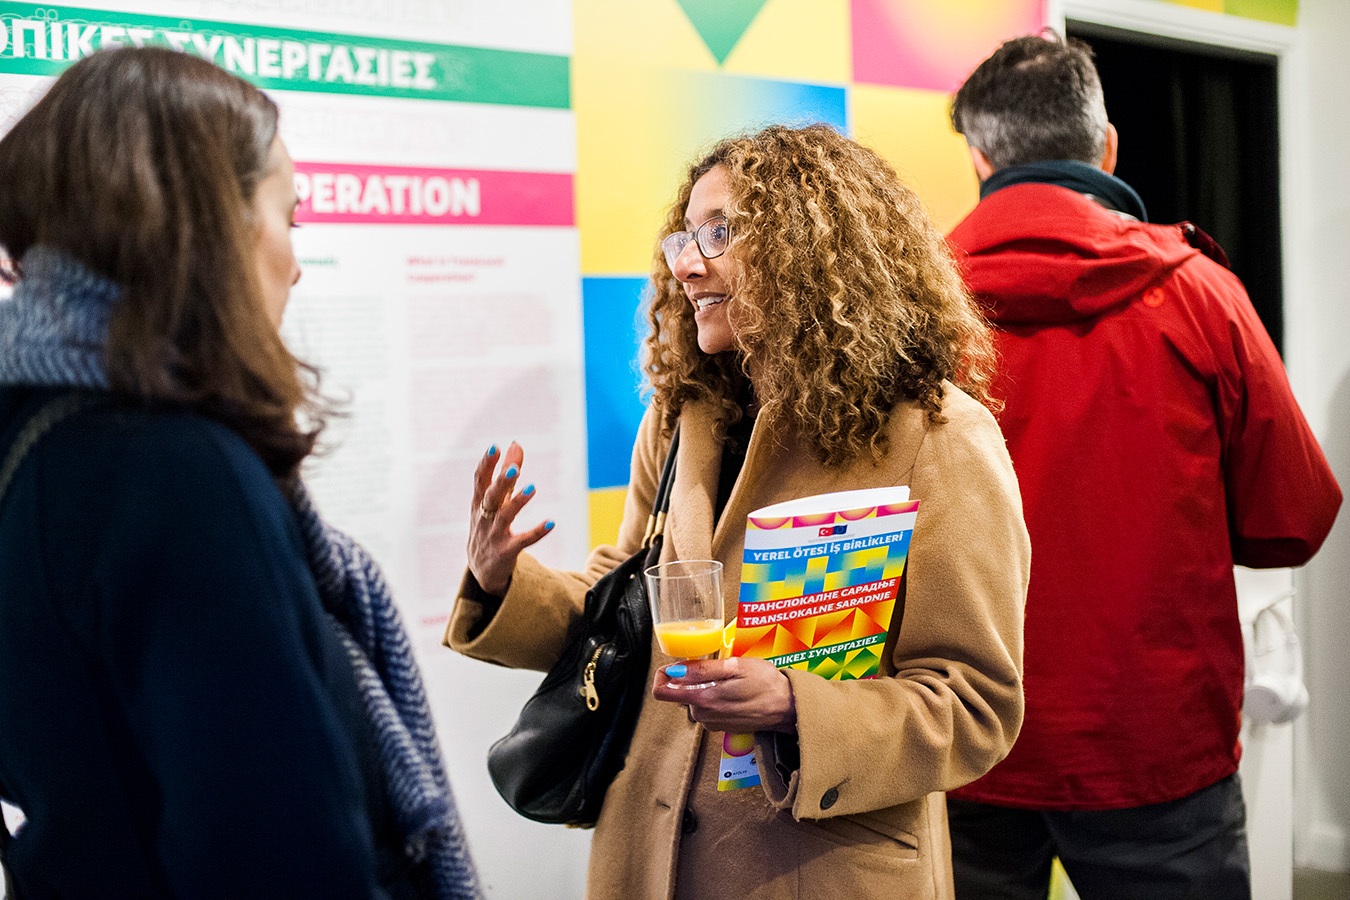 A member of the public holding the Trans Local Co-operation booklet, standing in front of the visual identity which has been applied in a large format wallpaper covering, the member of the public is talking and smiling to another during the exhibtion